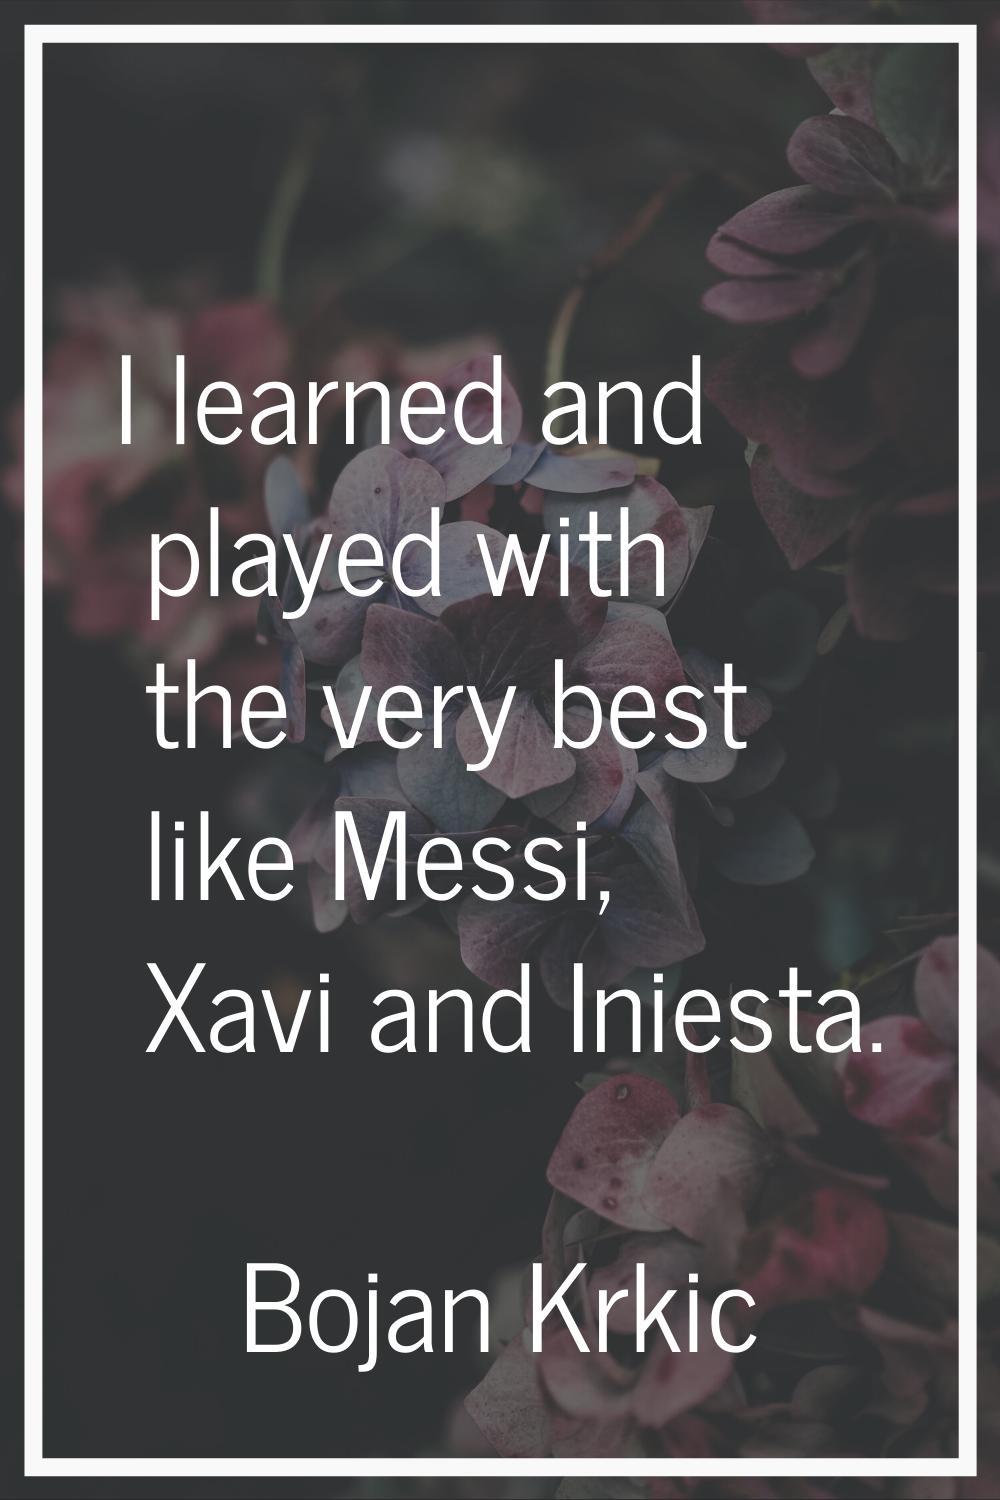 I learned and played with the very best like Messi, Xavi and Iniesta.